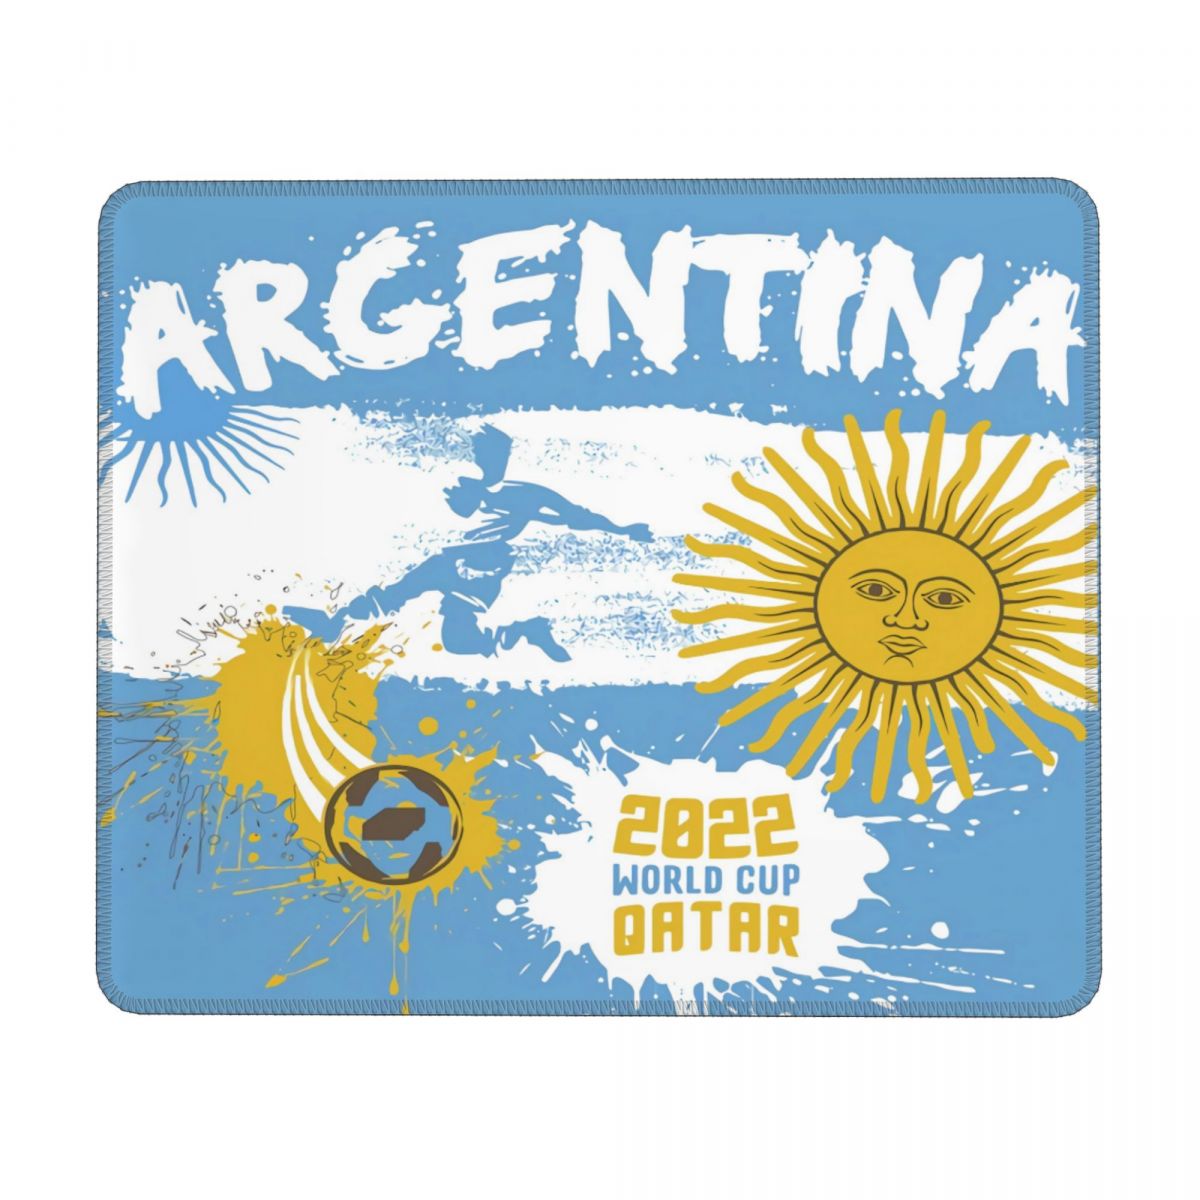 Argentina 2022 Qatar World Cup Square Waterproof Mouse Pad